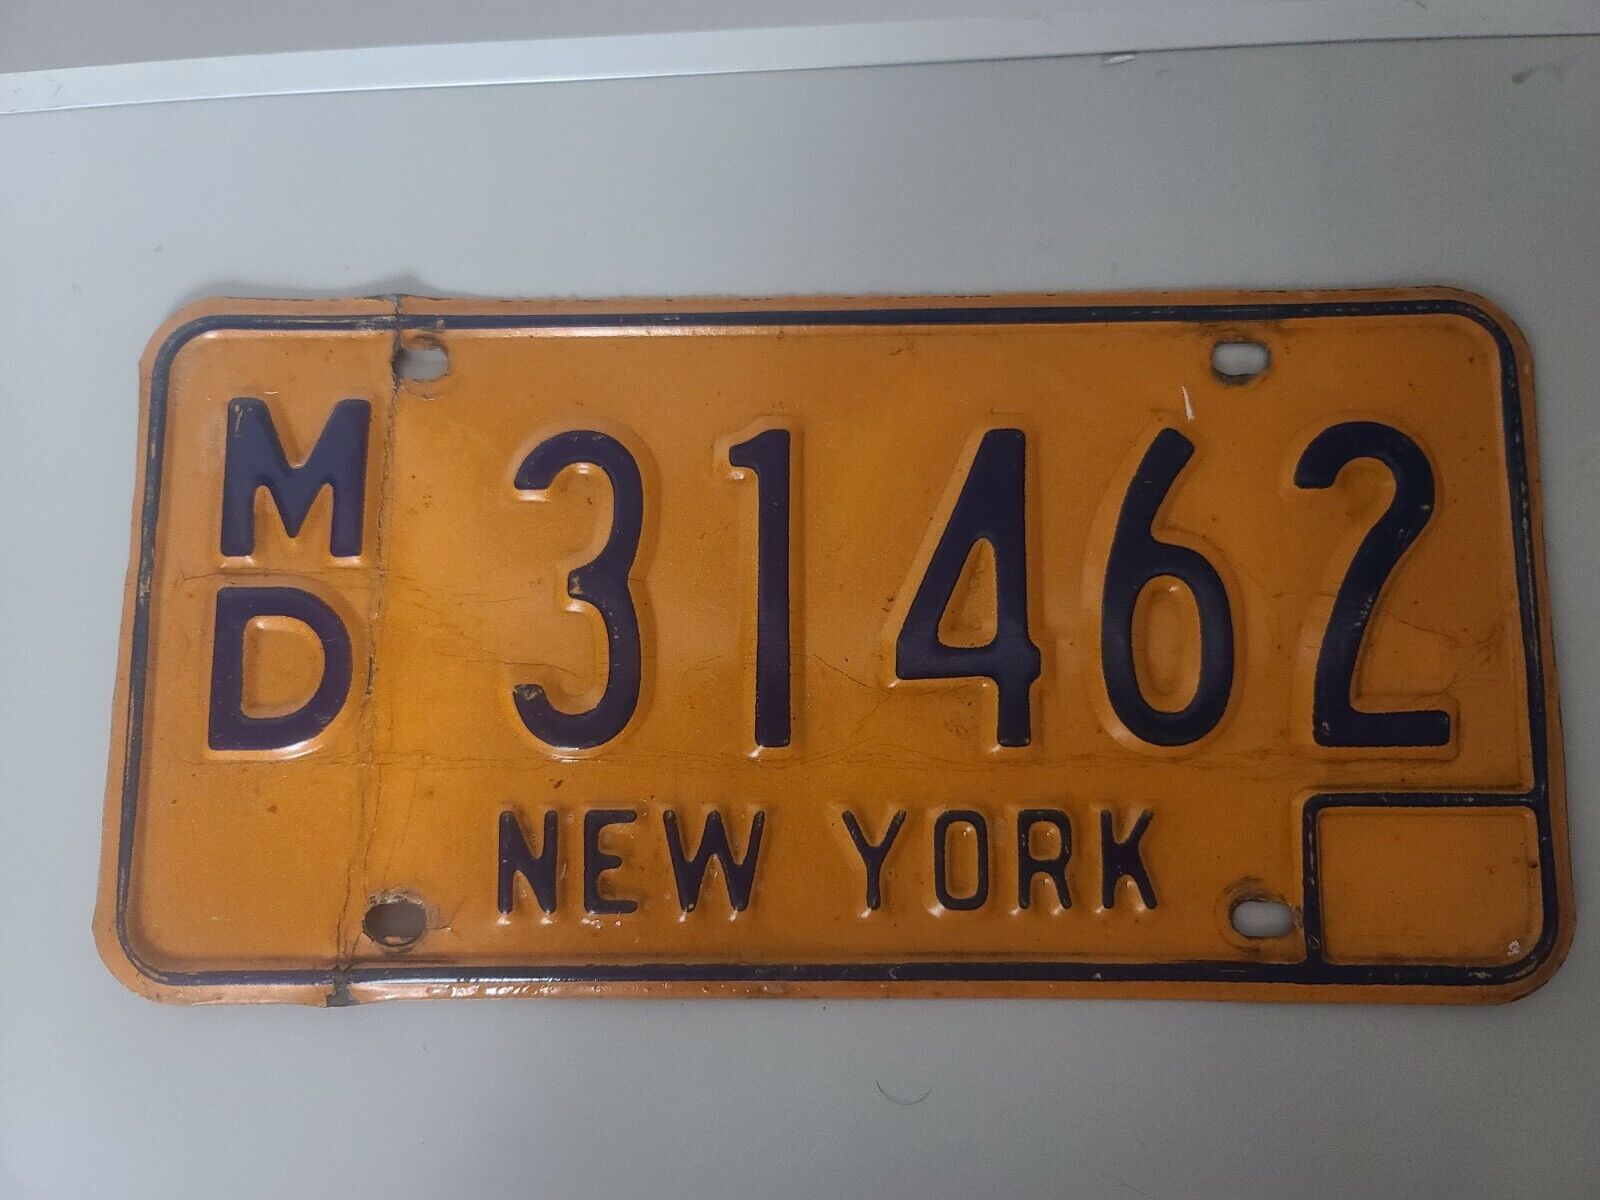 New York 1973-1986 Medical Doctor License Plate MD 31462  Good Condition